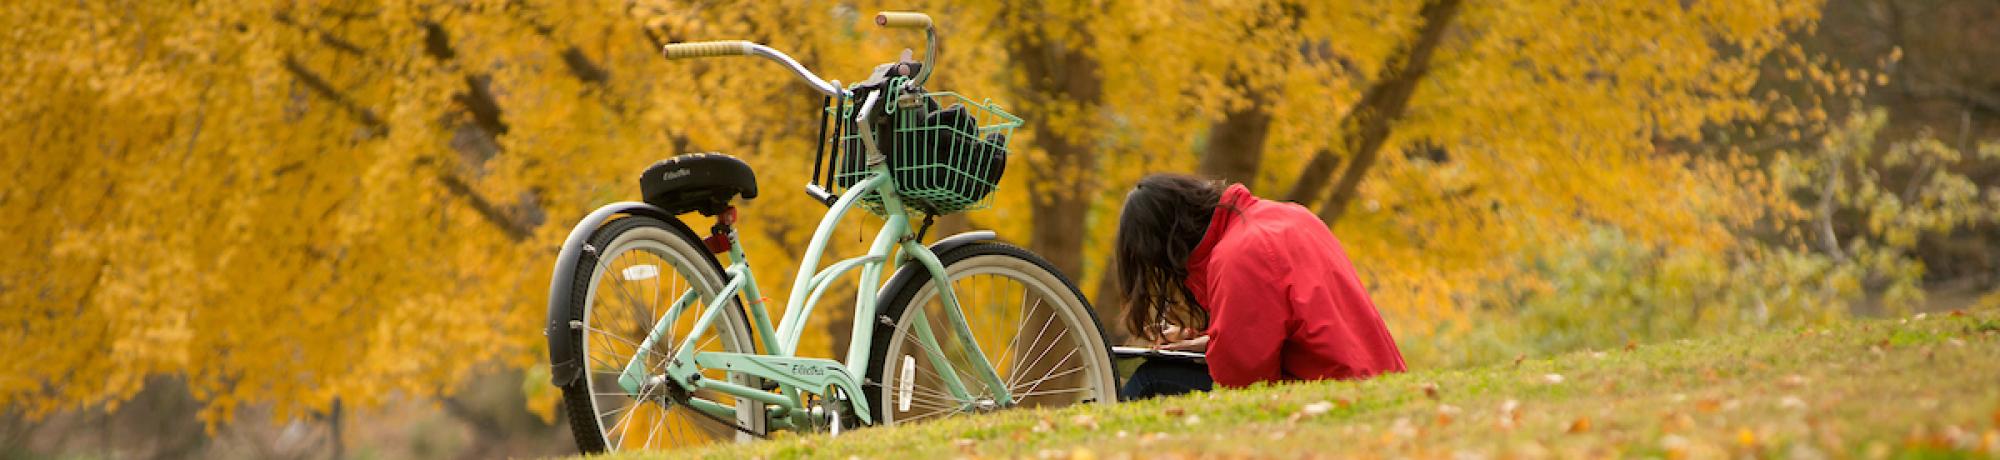 Student reading in leaf-covered grass, next to bike.